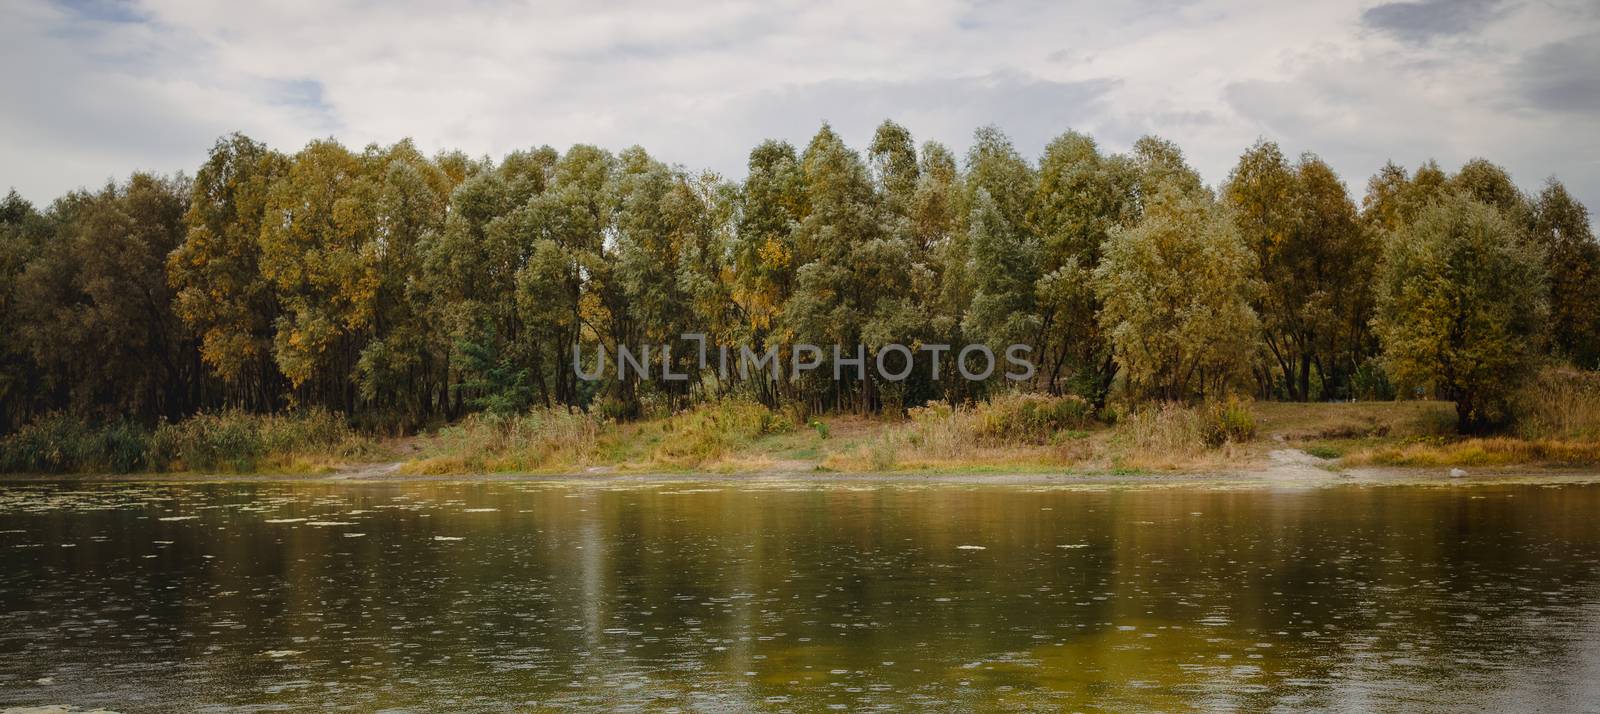 Rain and overcast sky over misty fall woodland. Orange autumn trees on riverbank and lake. Golden Autumn Landscape. Colorful trees in forest